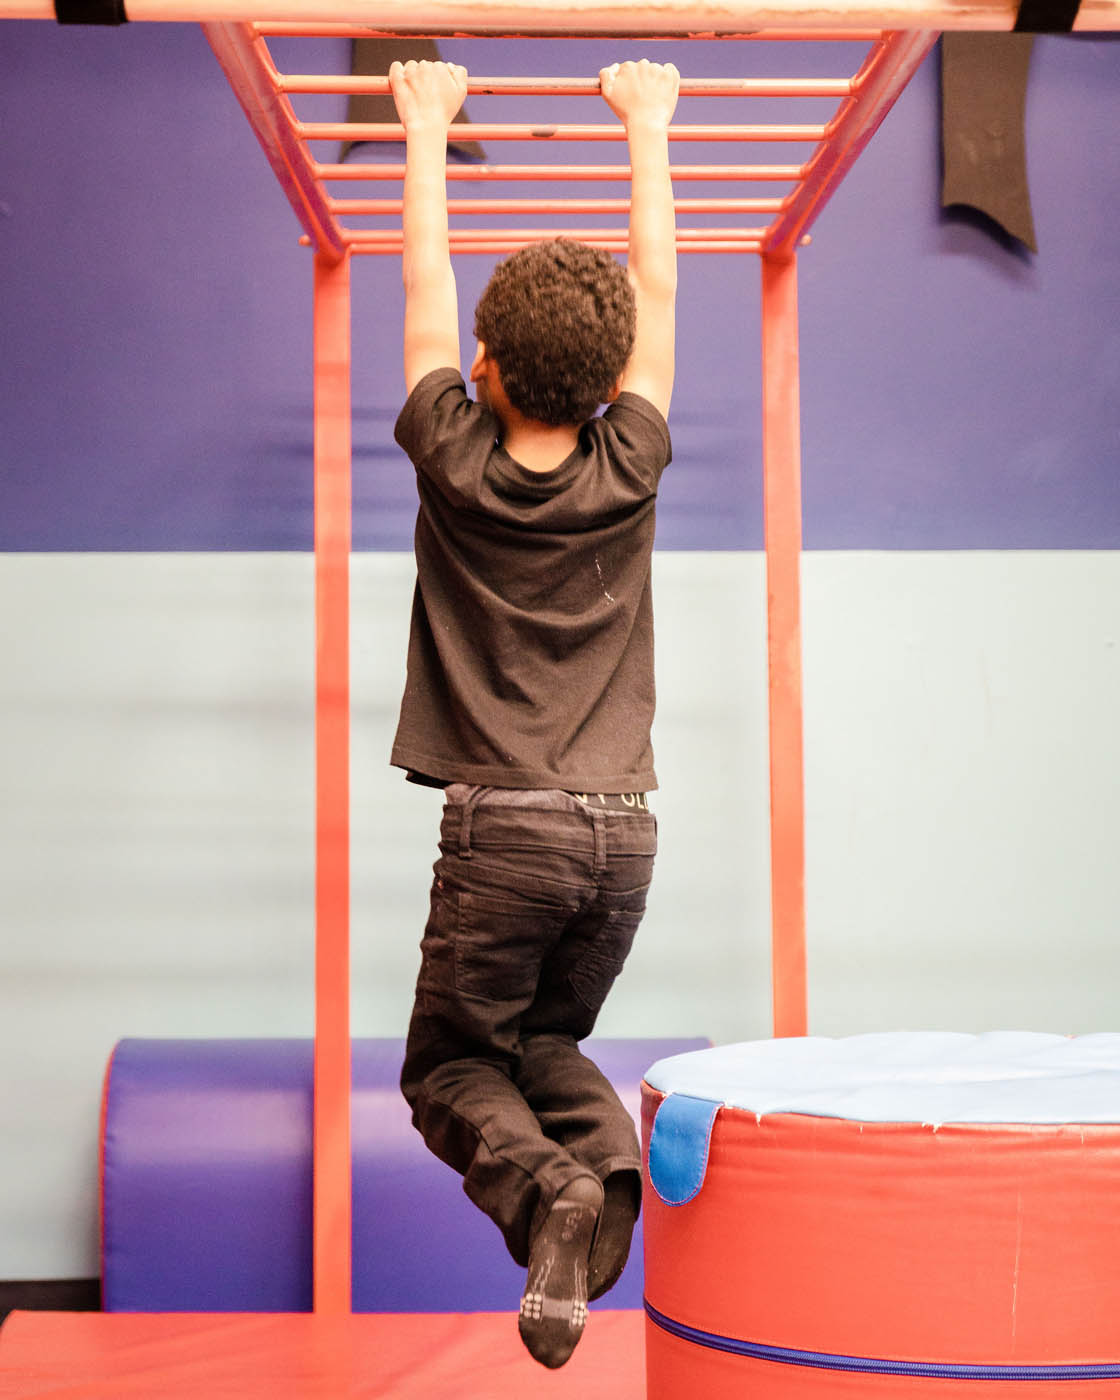 A little boy hanging on monkey bars, contact us today about our baby groups.